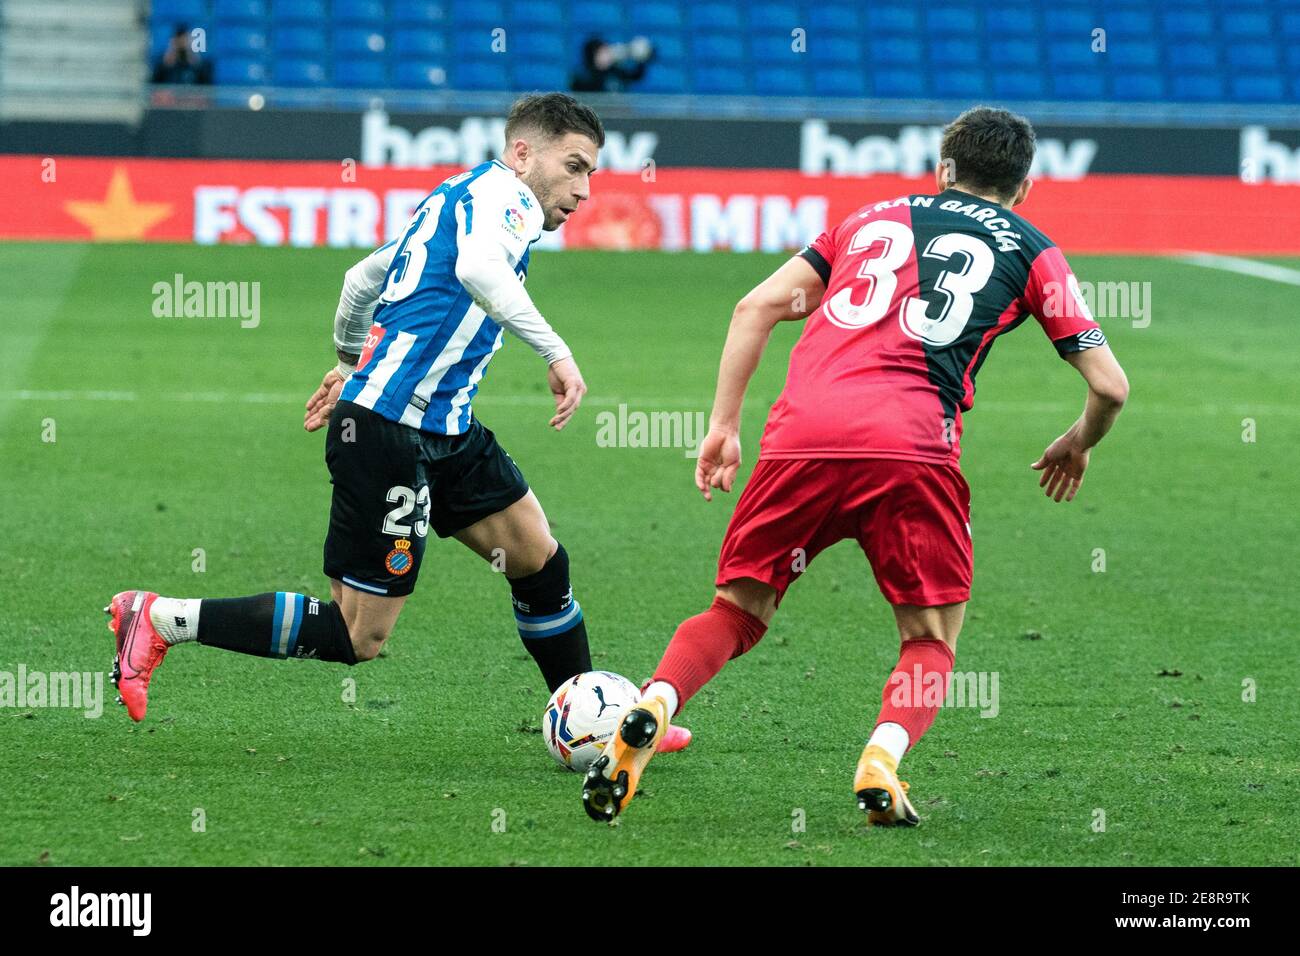 Cornella, Spain. 31st Jan, 2021. Espanyol's Adrian Embarba (L) vies with Vallecano's Fran Garcia during a Spanish second division league match between RCD Espanyol and Rayo Vallecano in Cornella, Spain, on Jan. 31, 2021. Credit: Joan Gosa/Xinhua/Alamy Live News Stock Photo